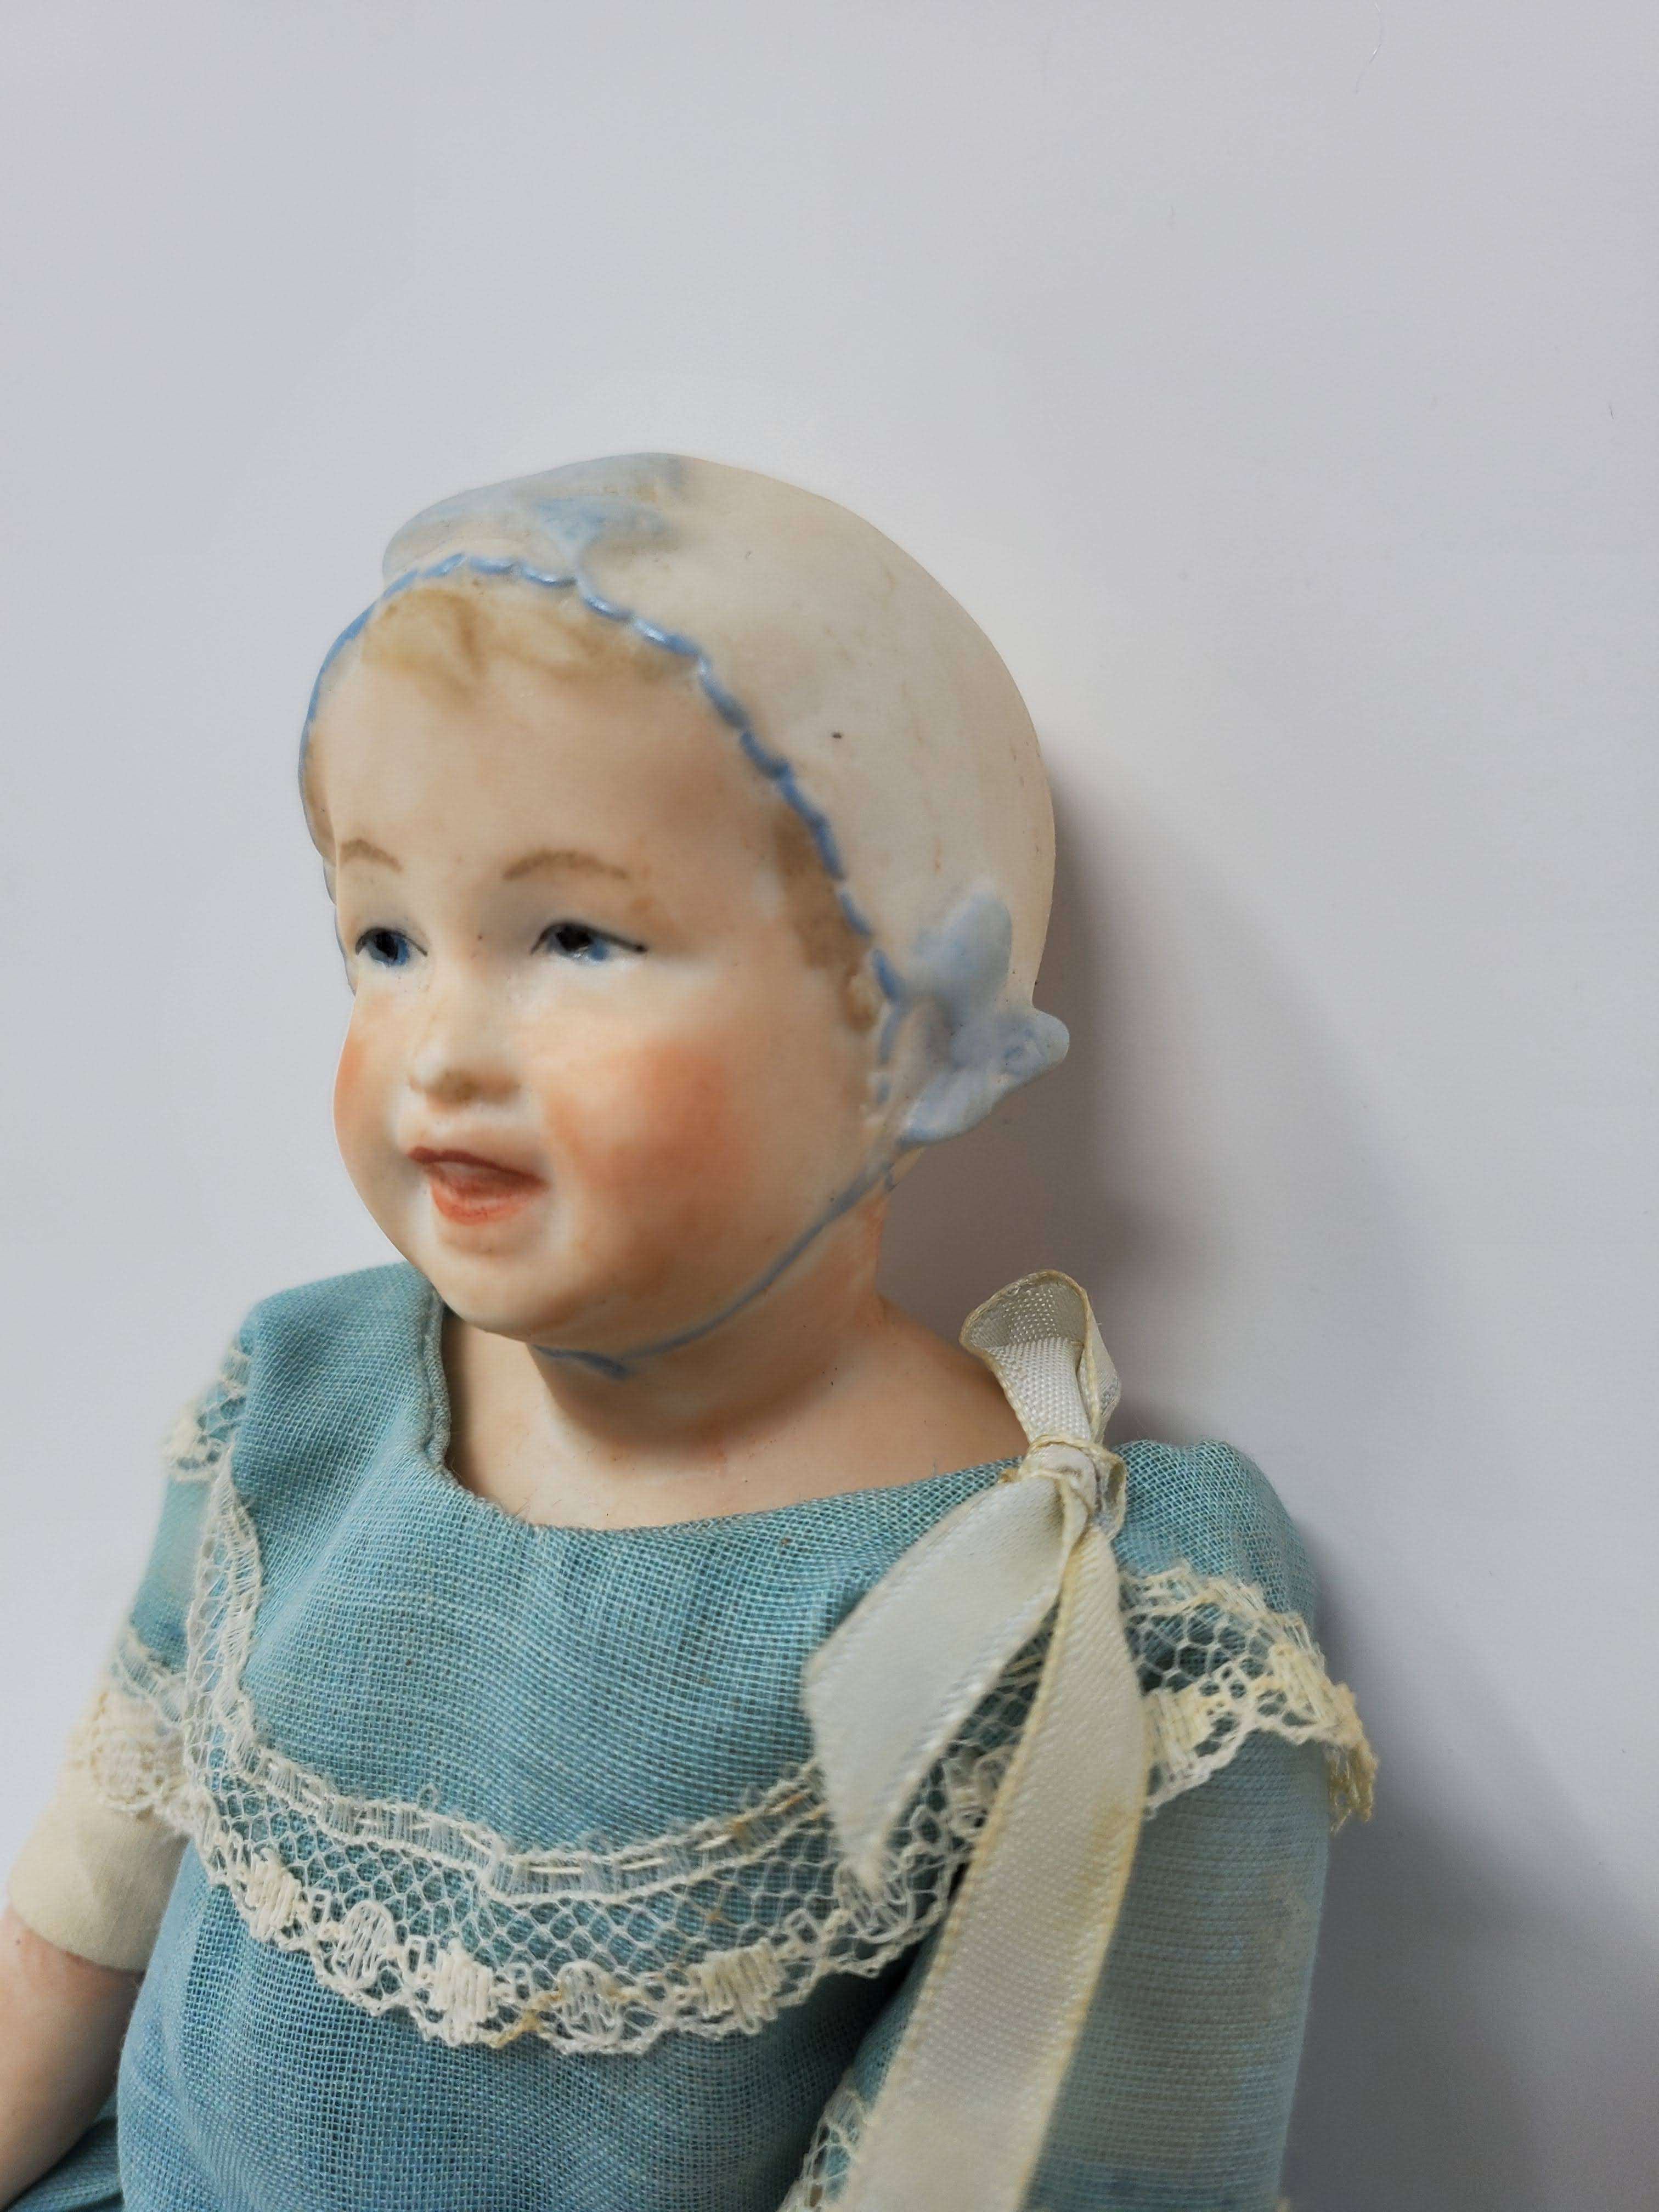 Bisque Dolls for Sale at Online Auction